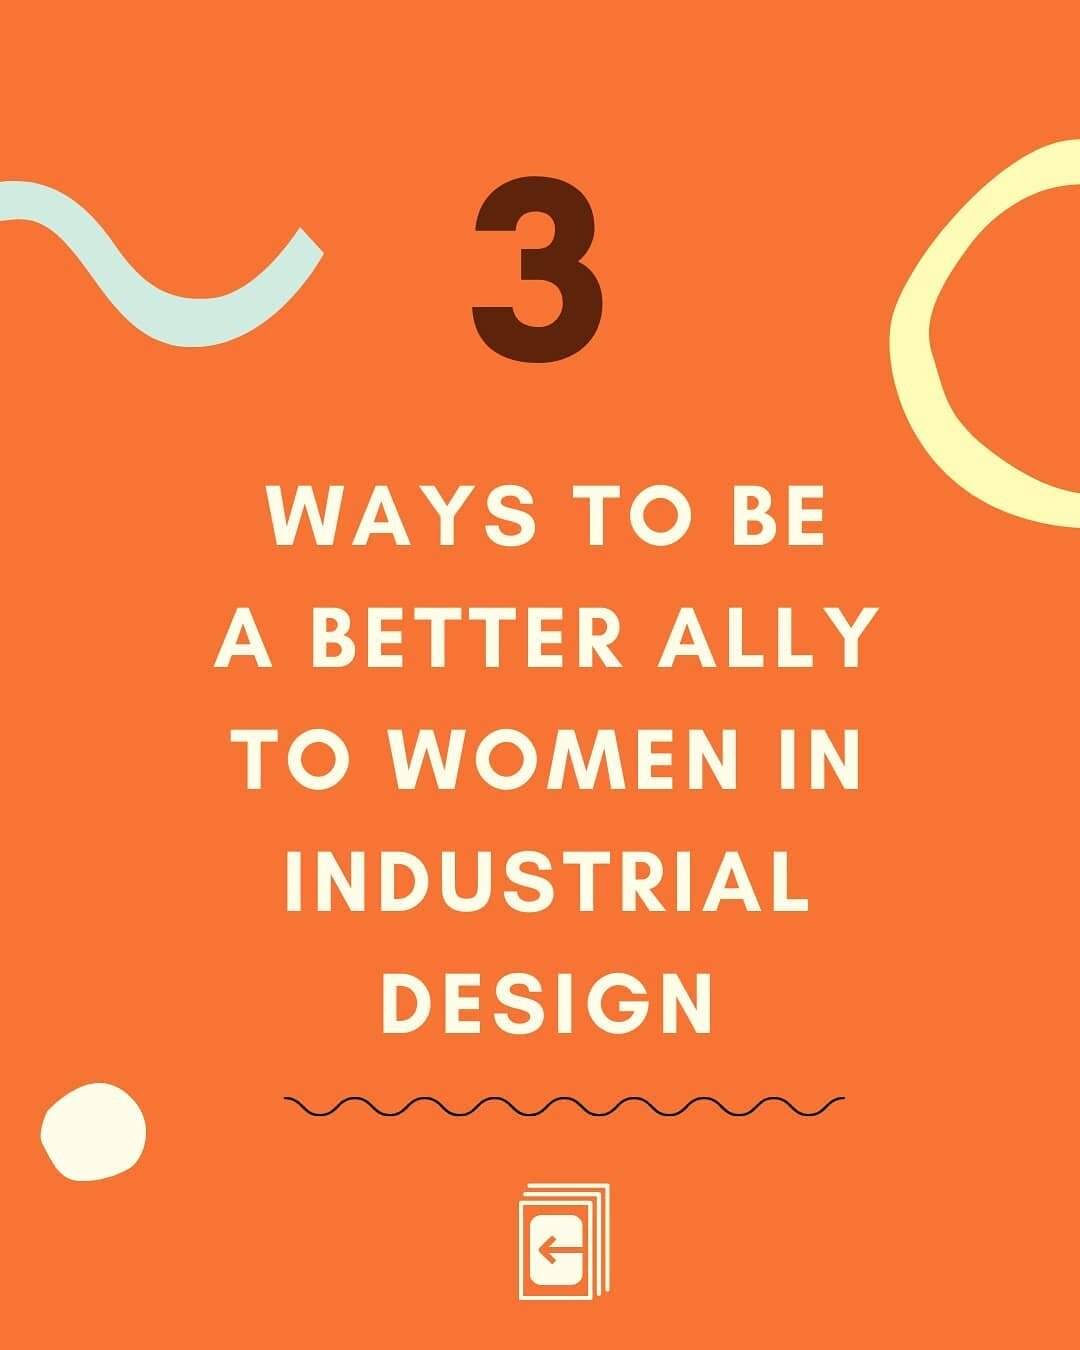 Here are three great tips on growing your allyship skills to better support women in industrial design. And you can download our Allyship Guide for more in-depth resources - link is in the bio! What other tips have you found helpful? Share in the com